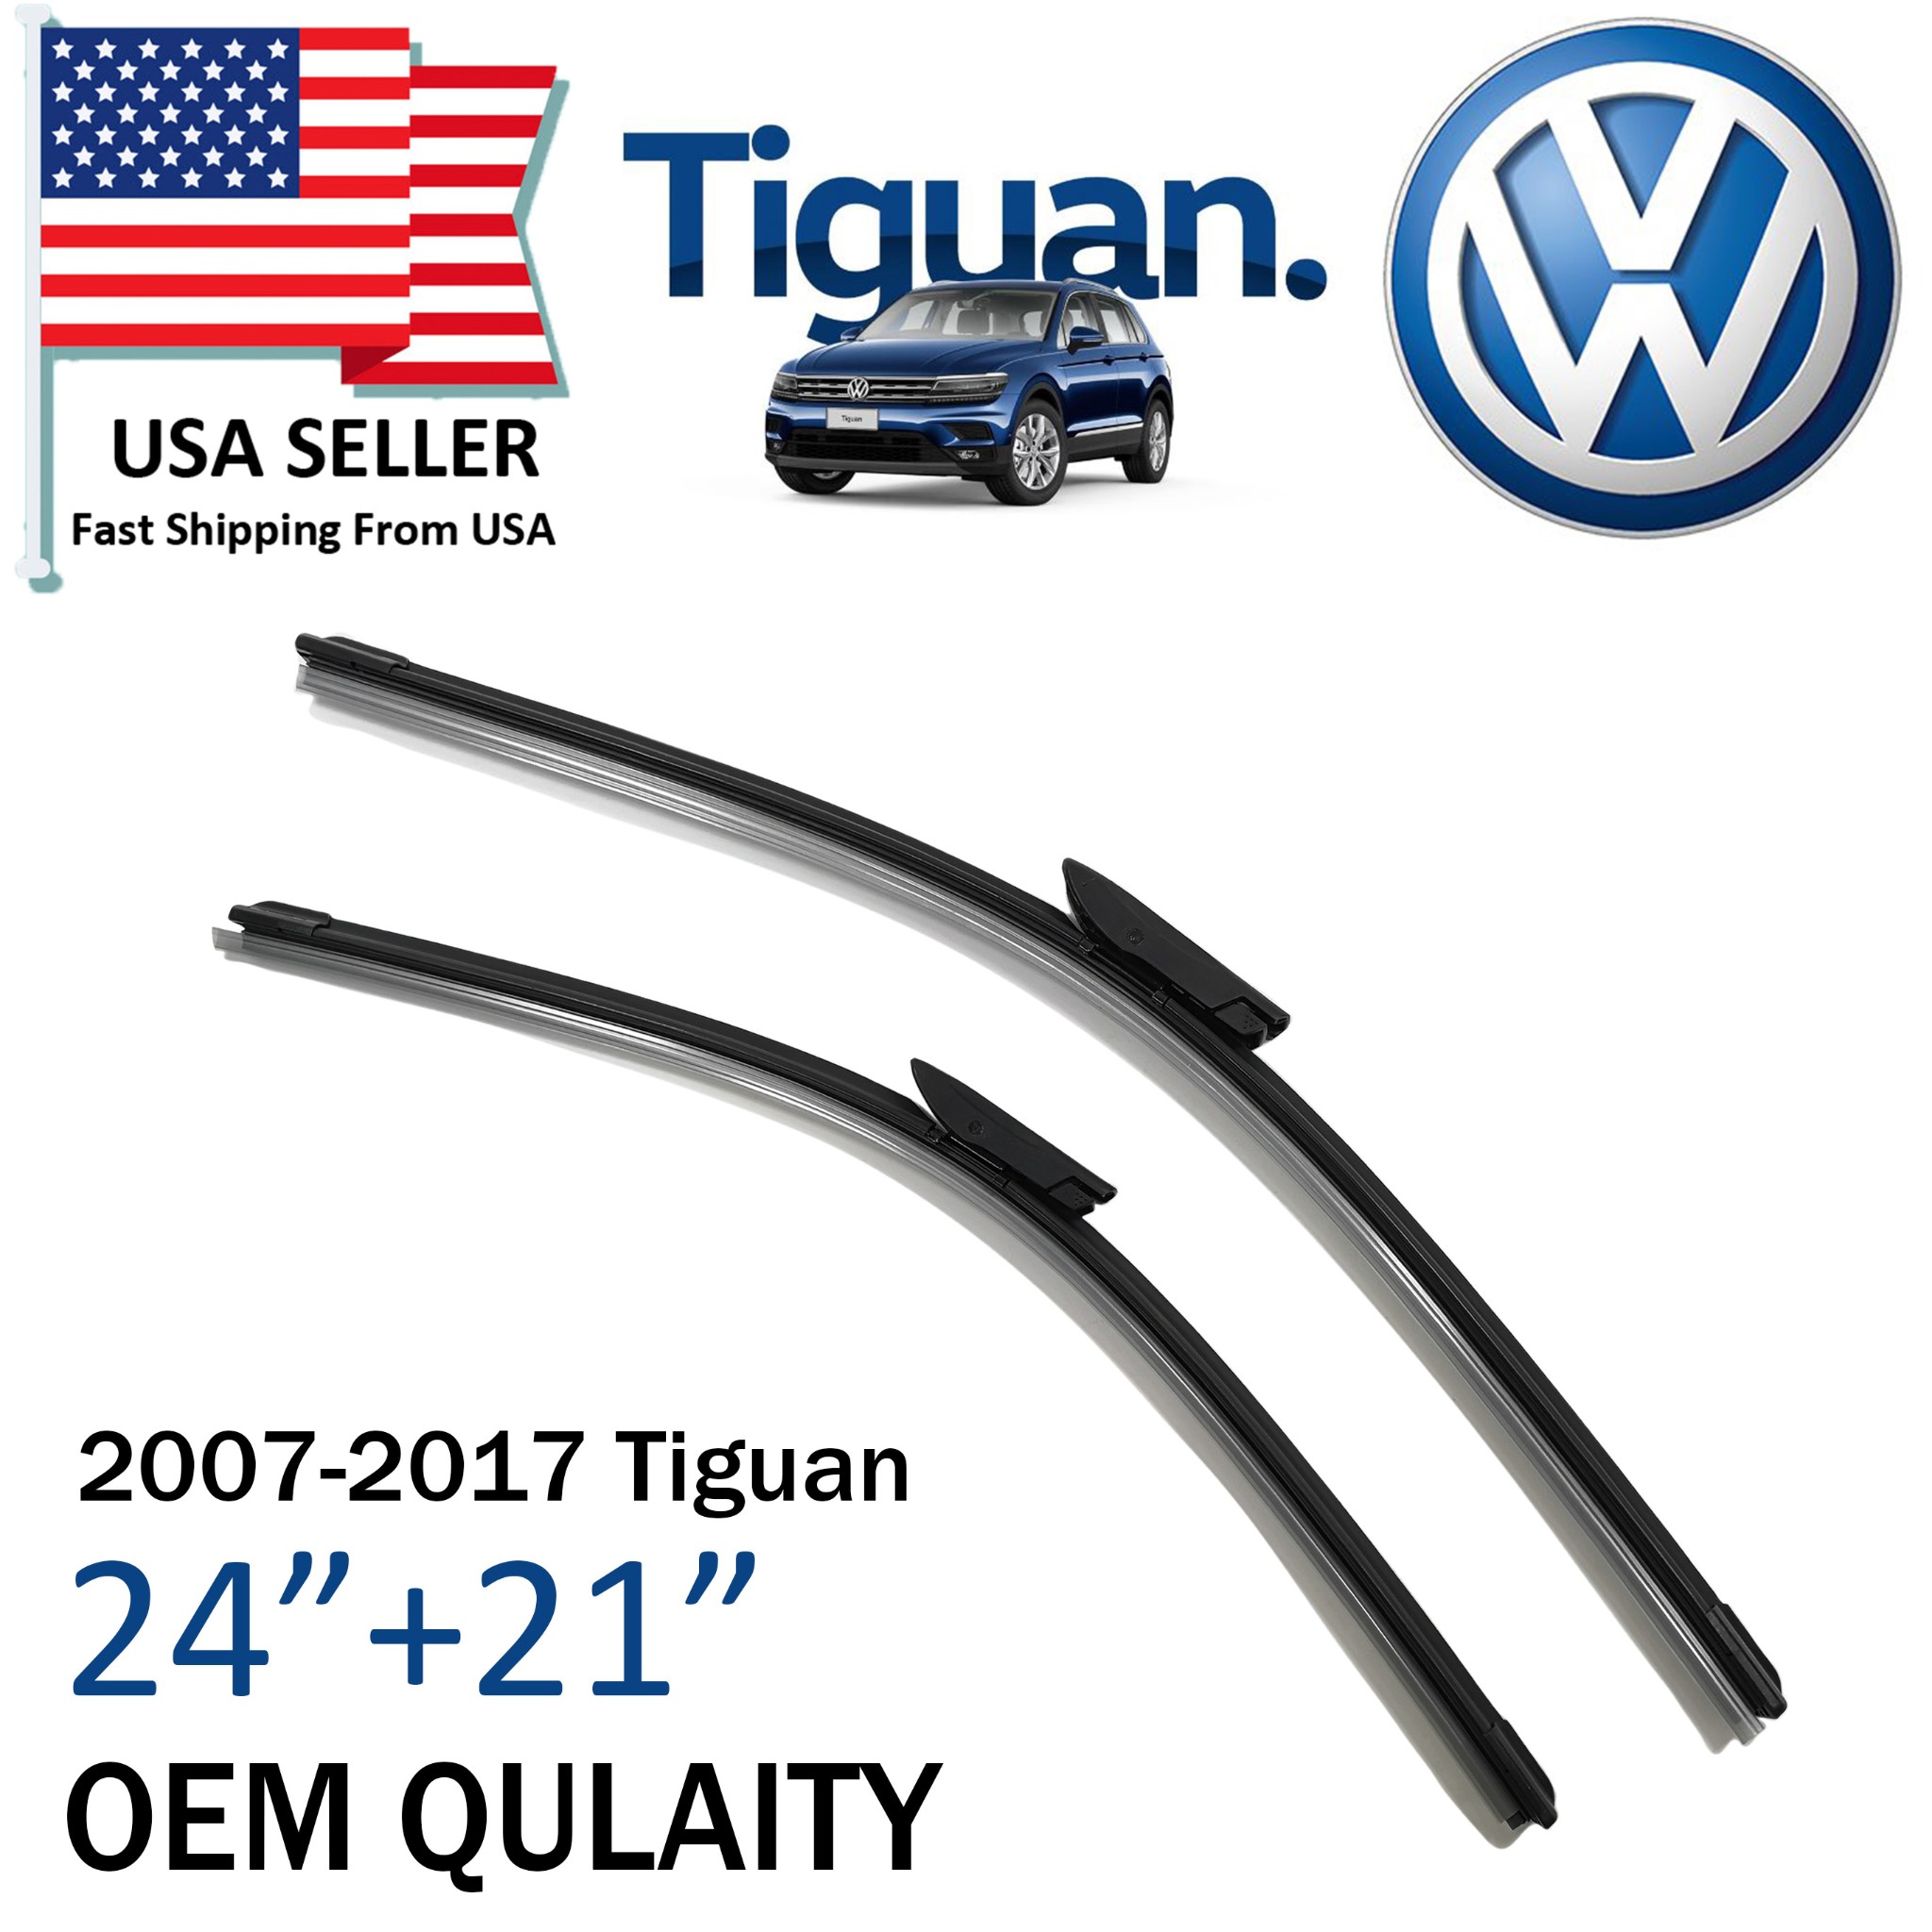 NeW Great OEM Quality 24"+ 21" Wiper Blades for 2007-2017 For Volkswagen Tiguan | eBay 2018 Chevy Traverse Rear Wiper Blade Size